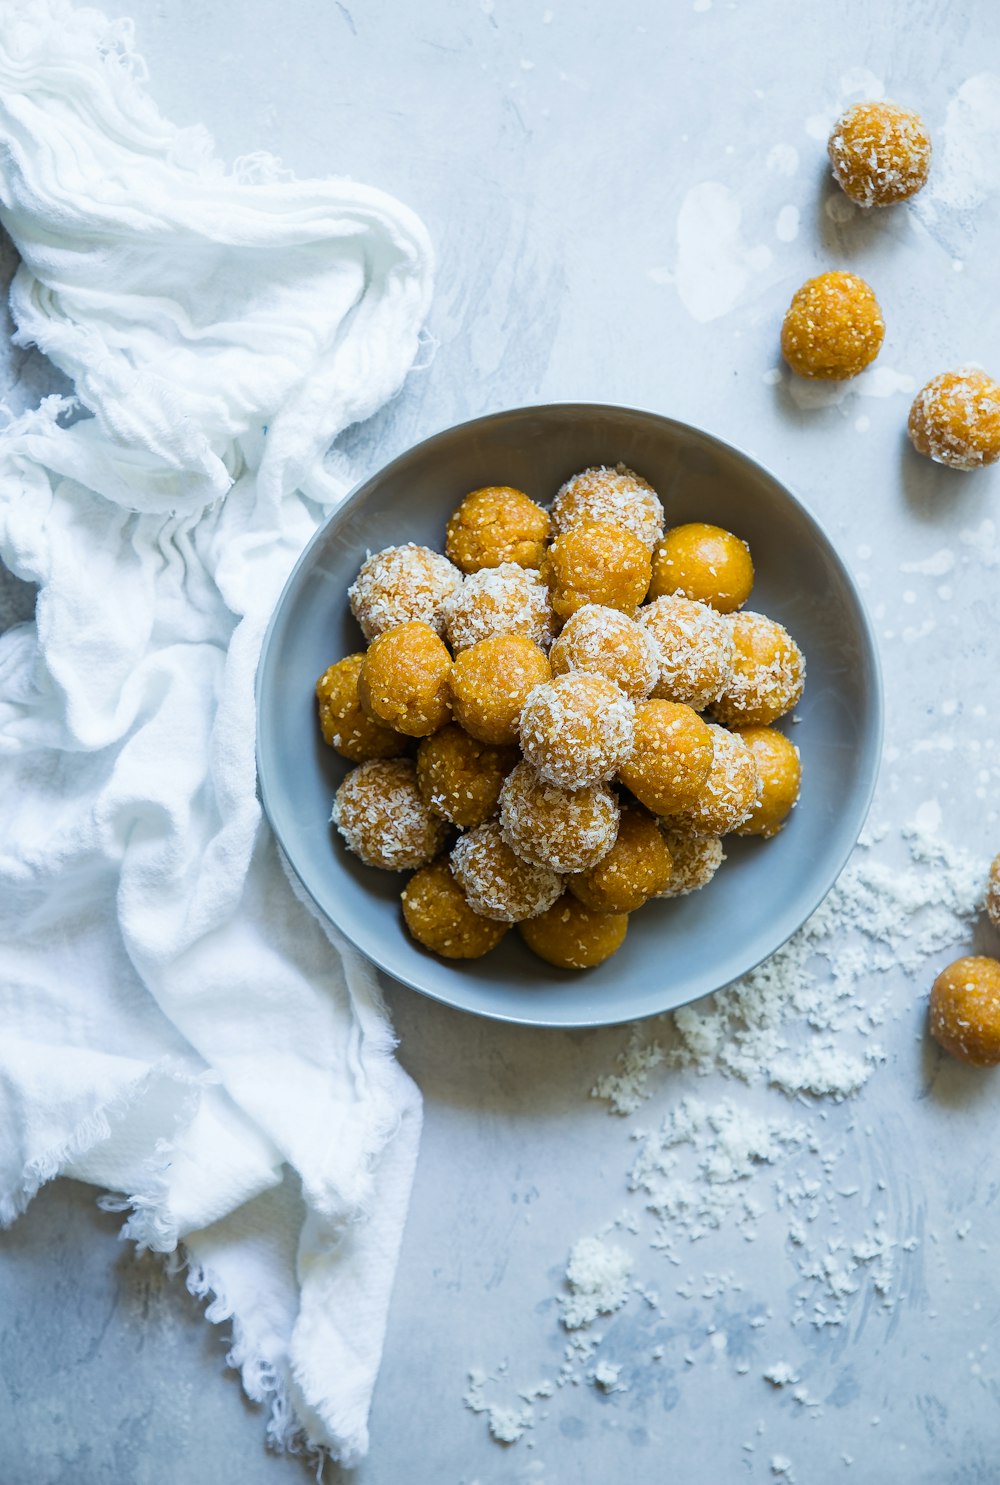 50,000+ Cheese Balls Pictures  Download Free Images on Unsplash